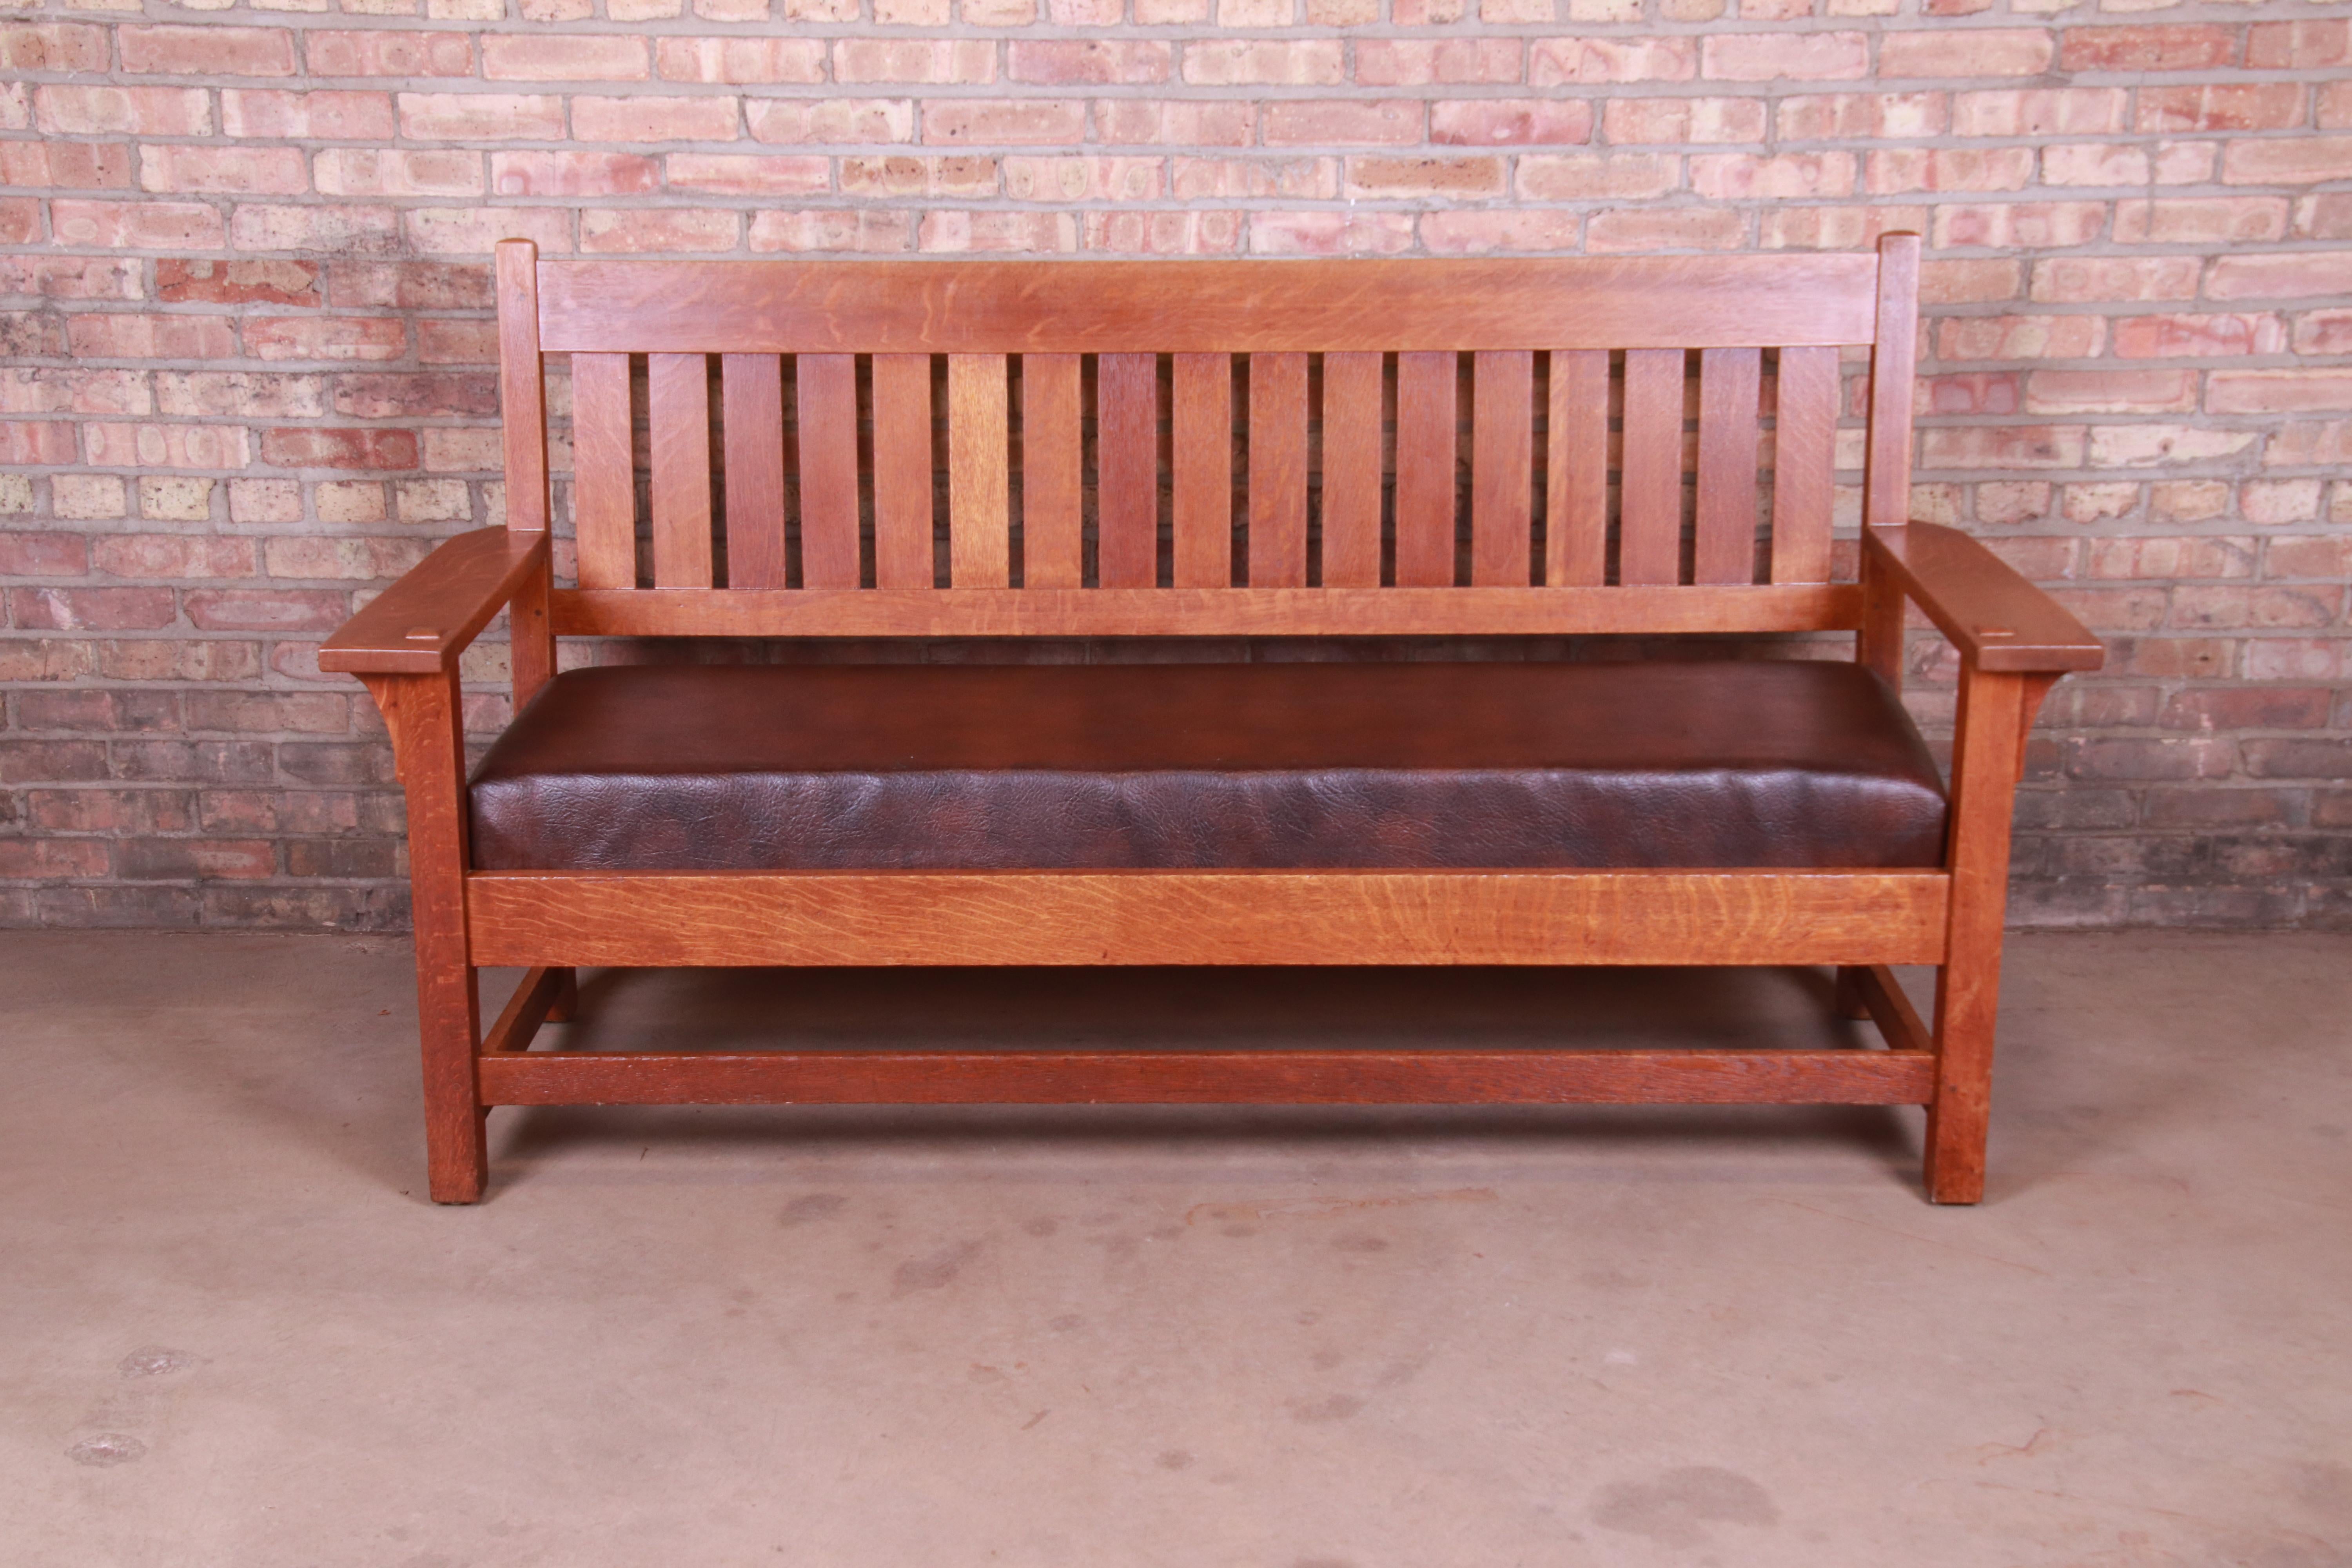 A rare and exceptional Mission Arts & Crafts settle sofa or bench

By Gustav Stickley (original branded label)

Eastwood, NY, circa 1900

Quartersawn oak, with upholstered seat.

Measures: 71.75